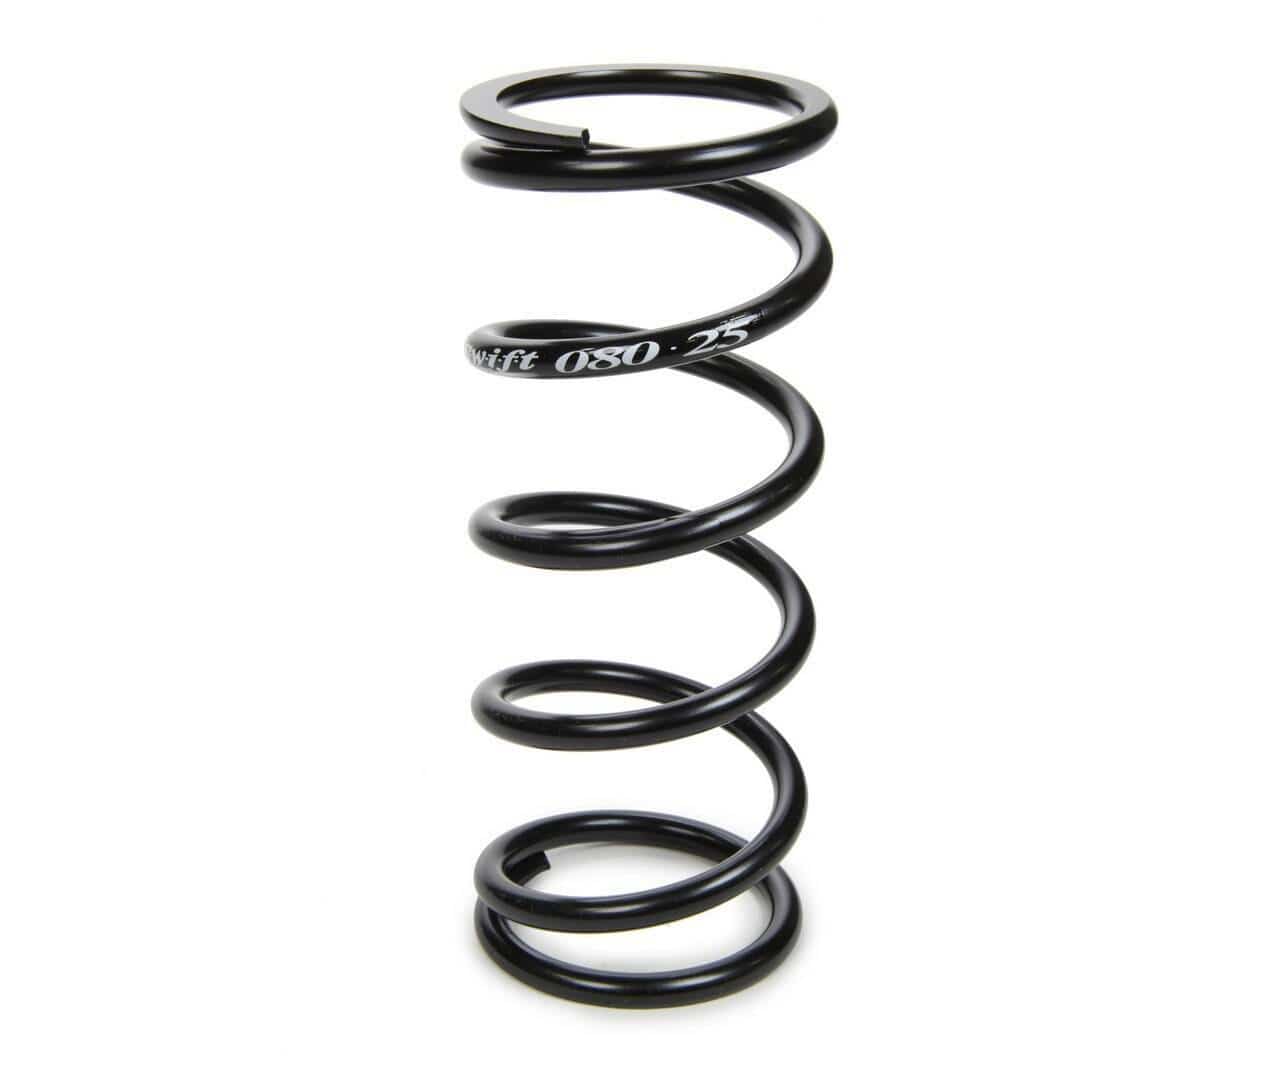 Swift Springs Standard Coilover Spring (Barrel Type) - ID 1.88", 10" Length